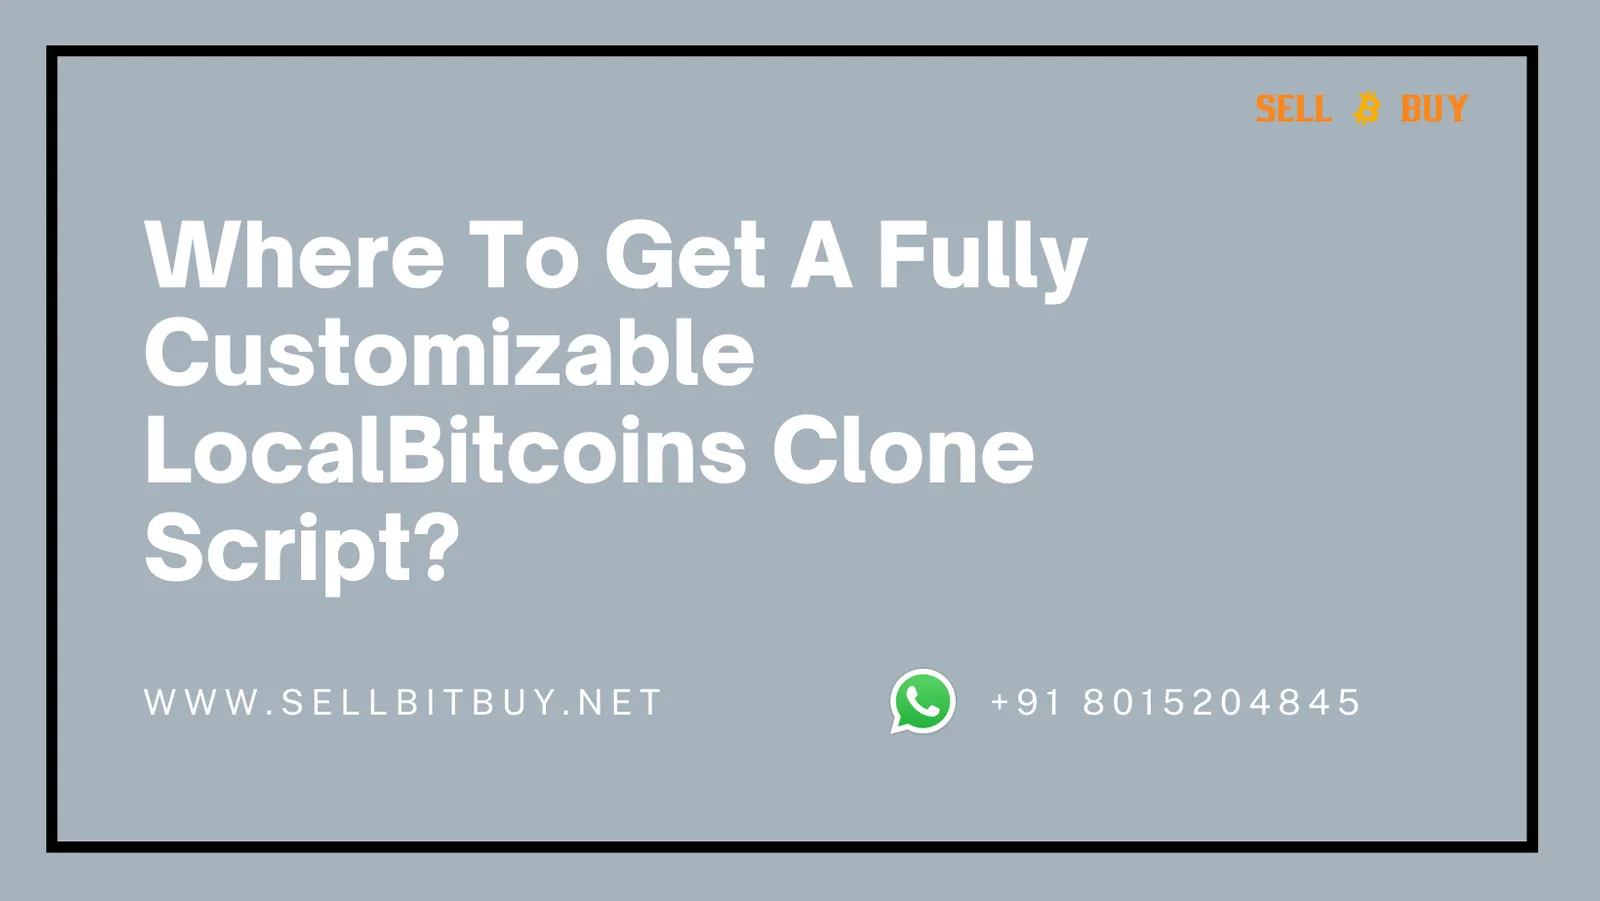 Where To Get A Fully Customizable Localbitcoins Clone Script?